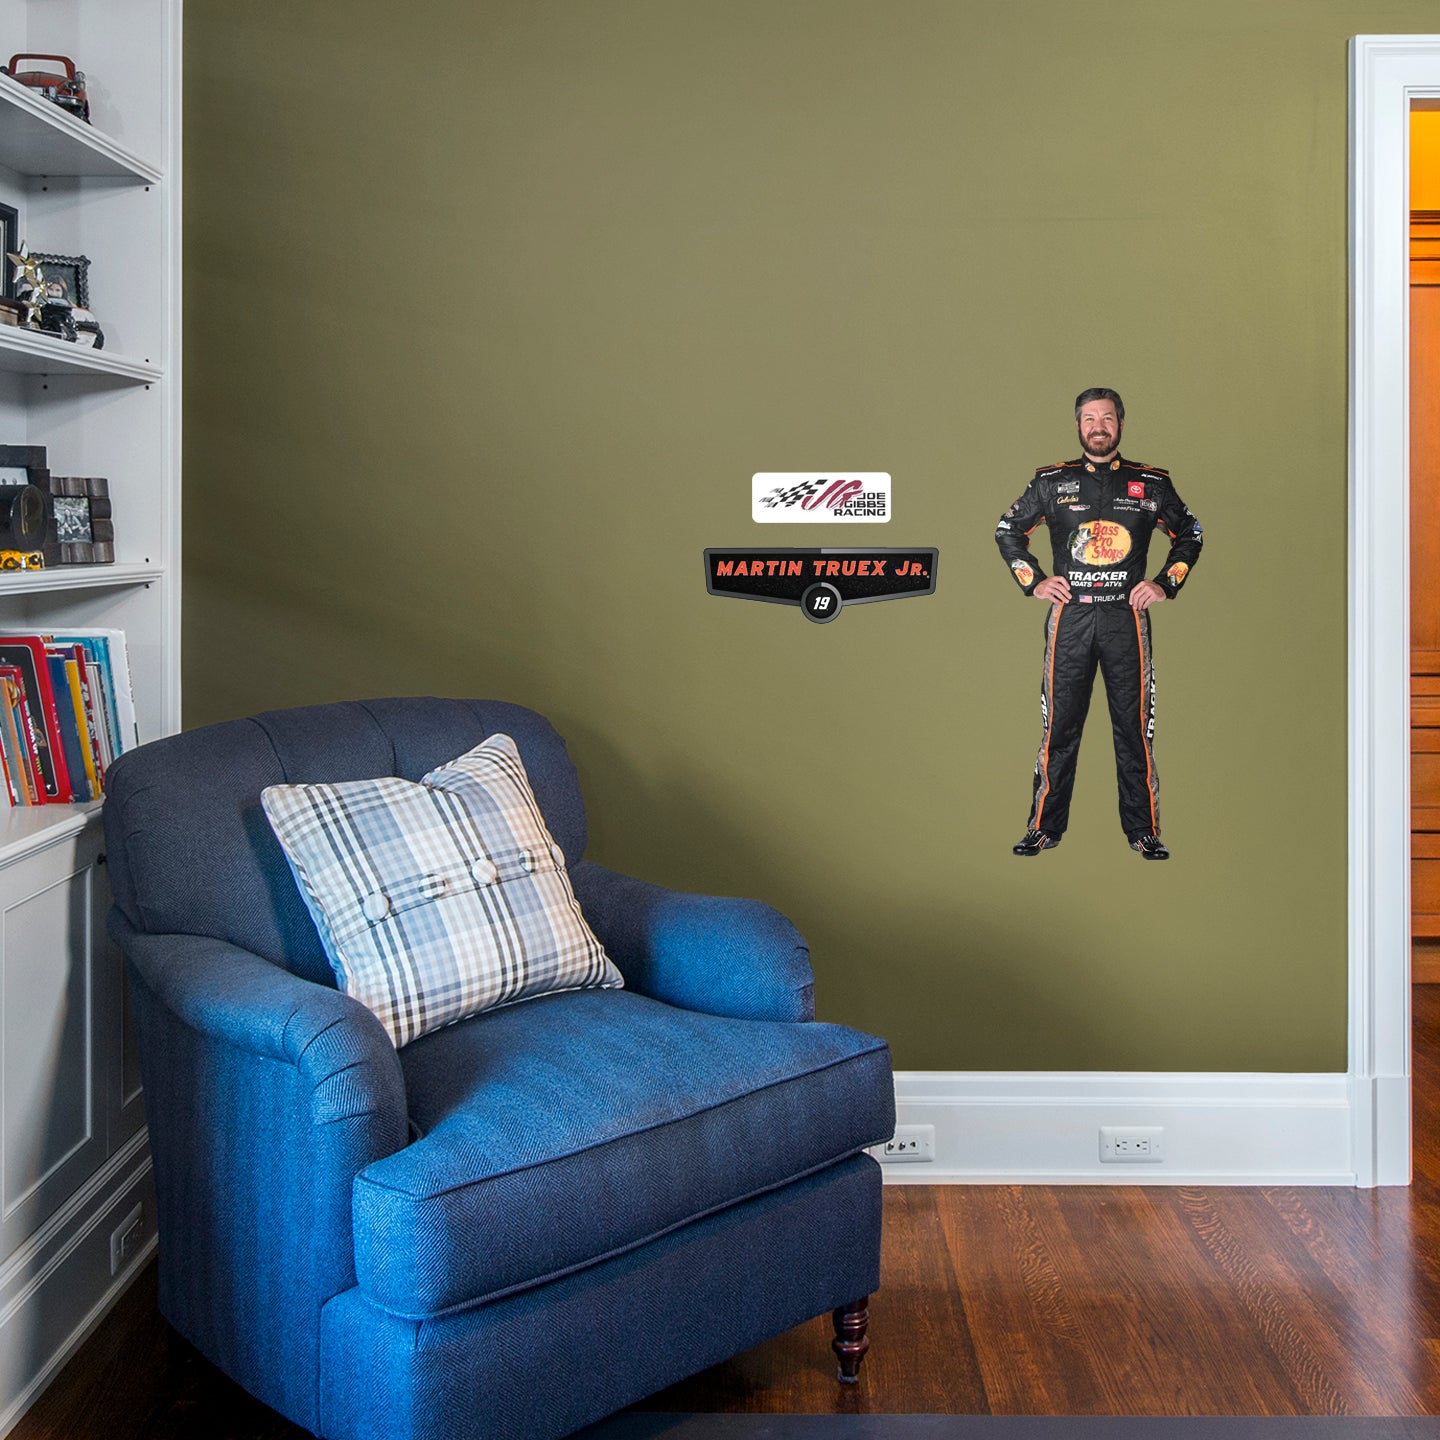 Martin Truex Jr. 2021 Driver - Officially Licensed NASCAR Removable Wall Decal XL by Fathead | Vinyl